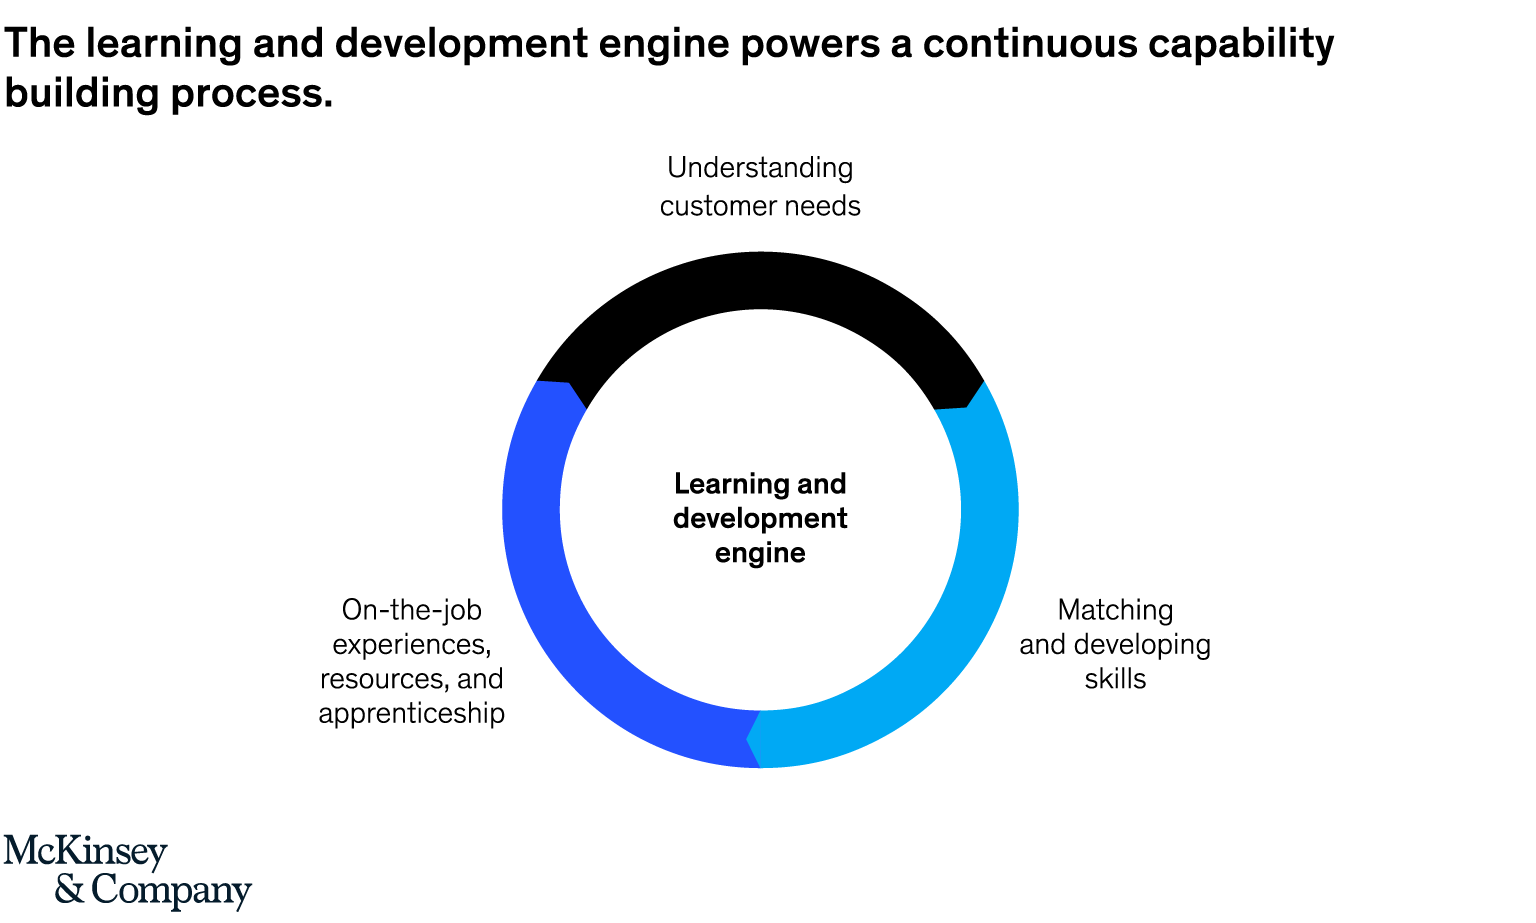 The learning and development engine powers a continuous capability building process